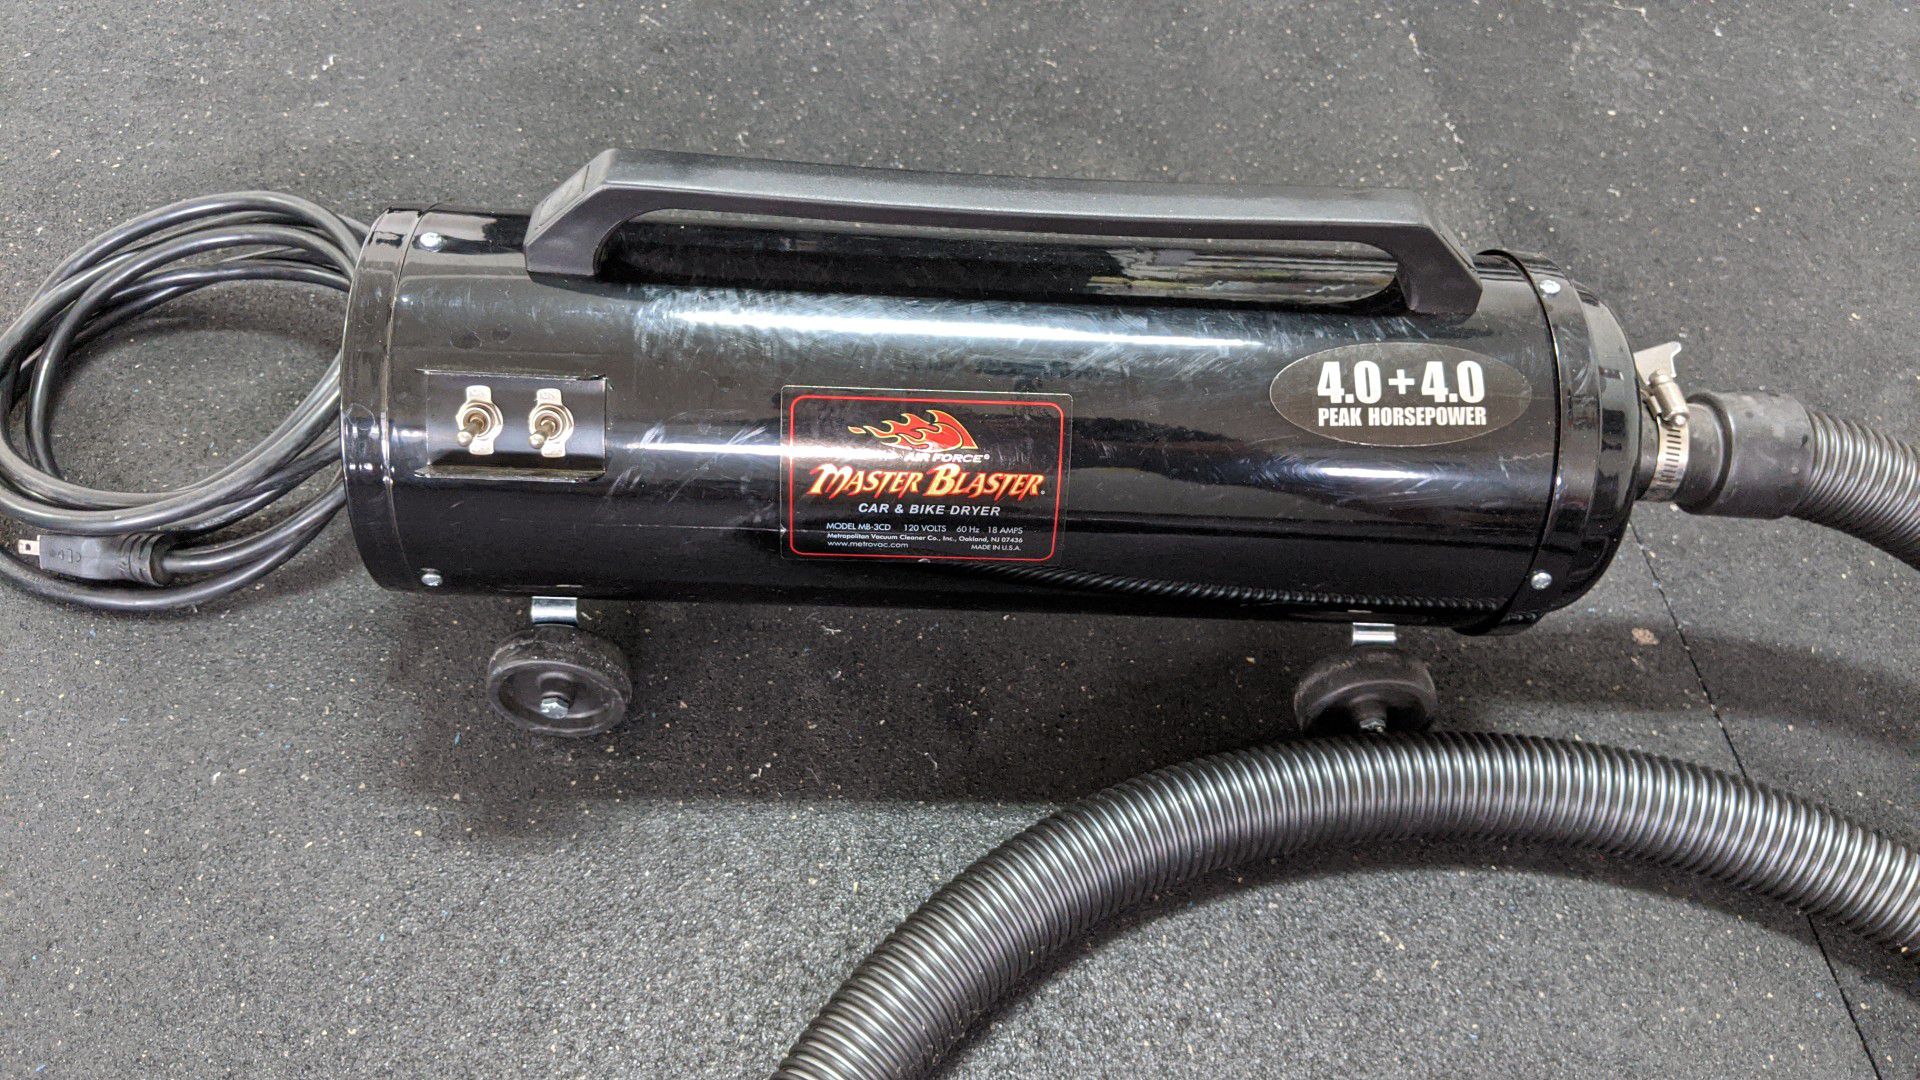 Master Blaster Forced Air Blower